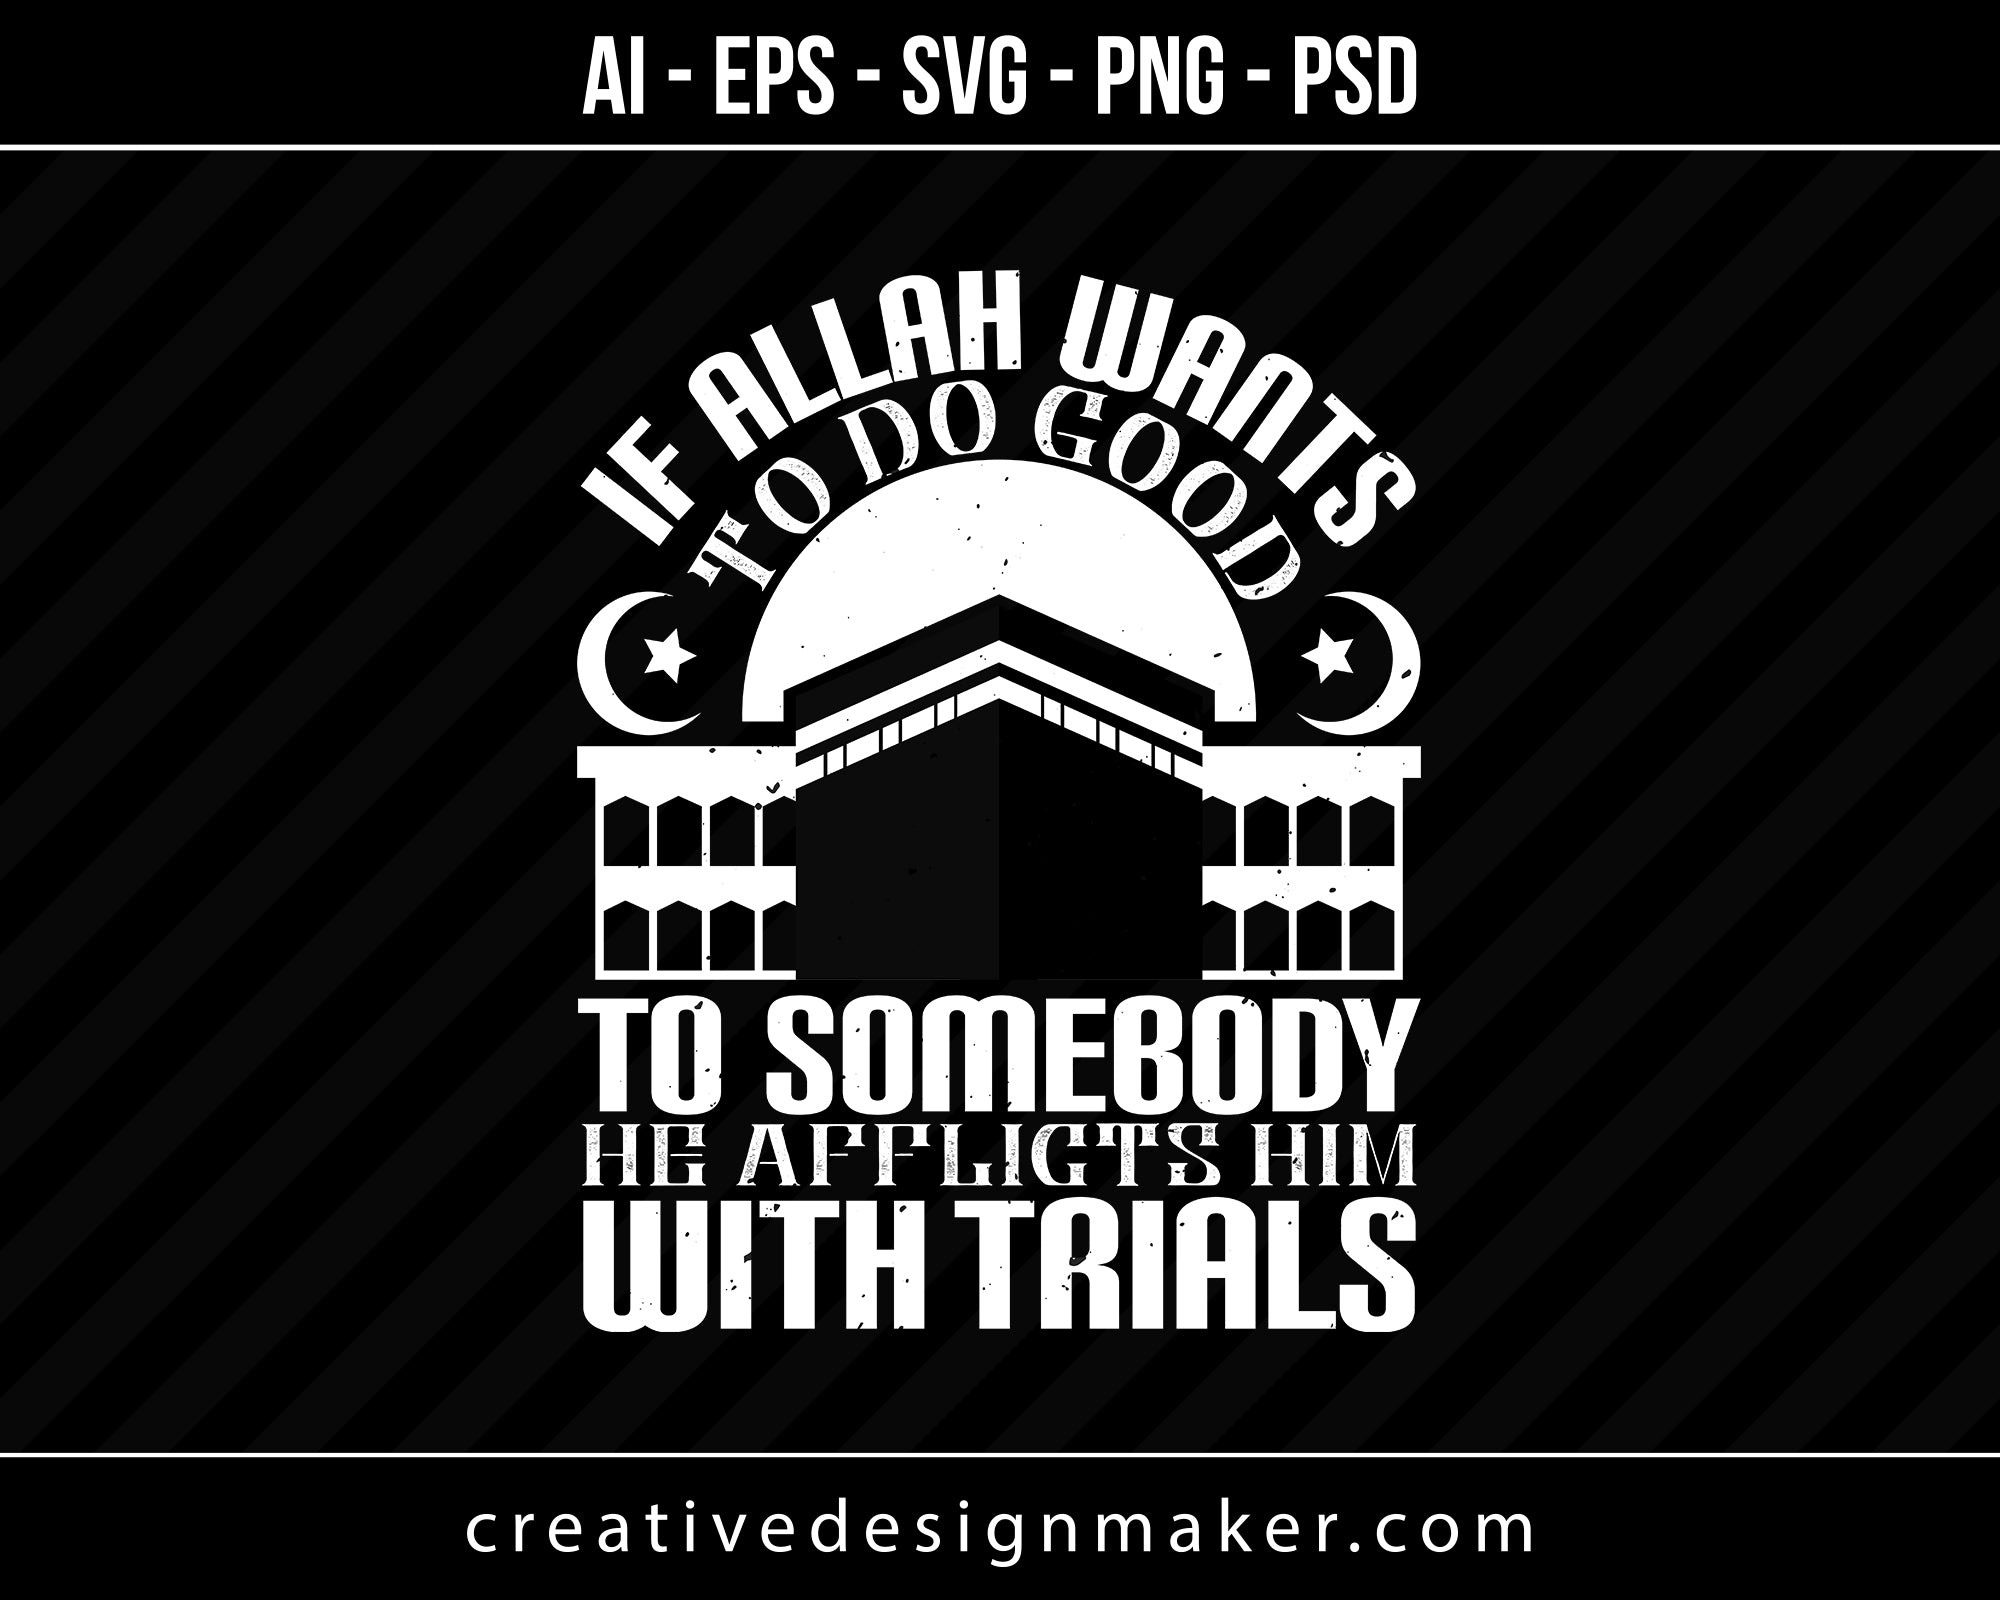 If Allah wants to do good to somebody he afflicts him with trials Islamic Print Ready Editable T-Shirt SVG Design!